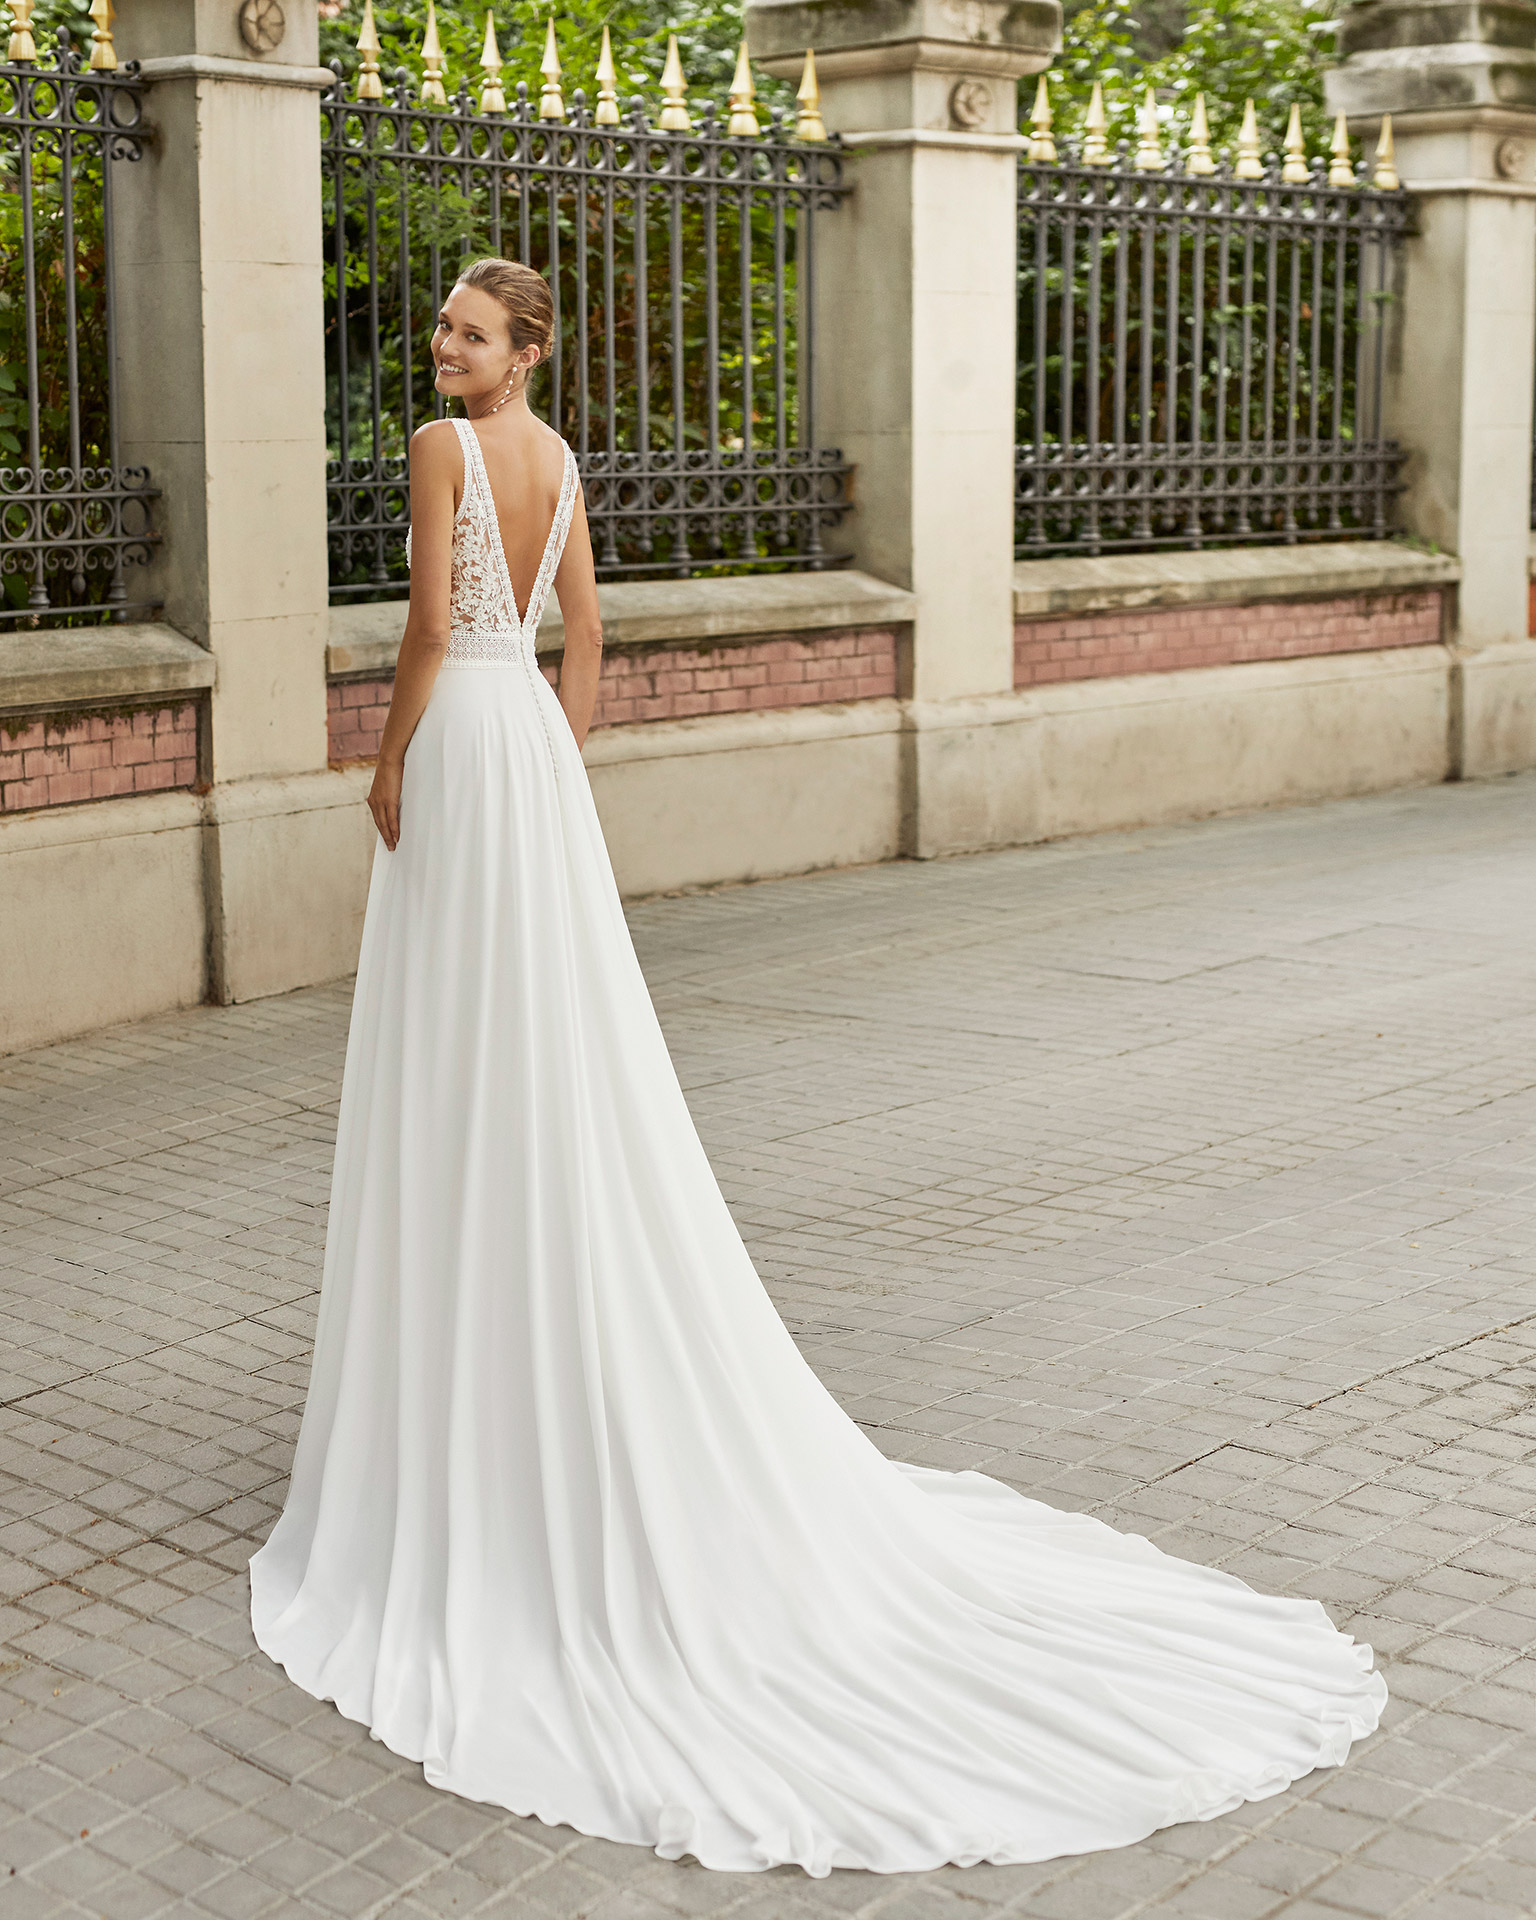 Lightweight wedding dress in georgette and beaded lace. Deep-plunge neckline and V-back. 2022  Collection.